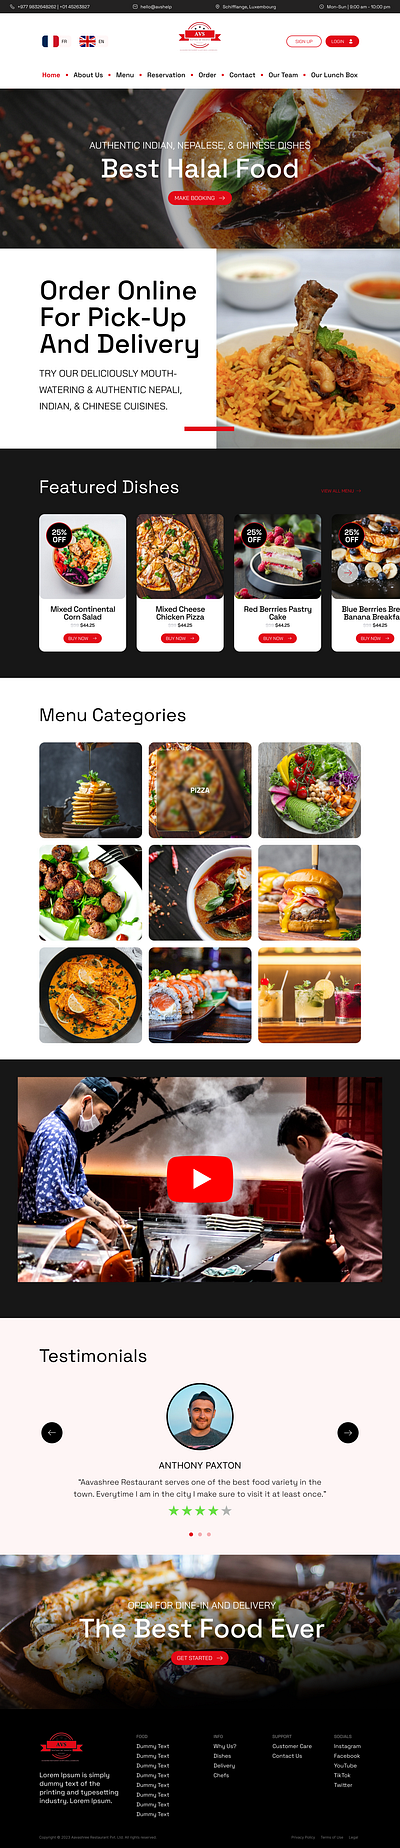 Aavashree - A Luxembourg Based Restaurant Website Landing Page landing page restaurant design ui ux website design